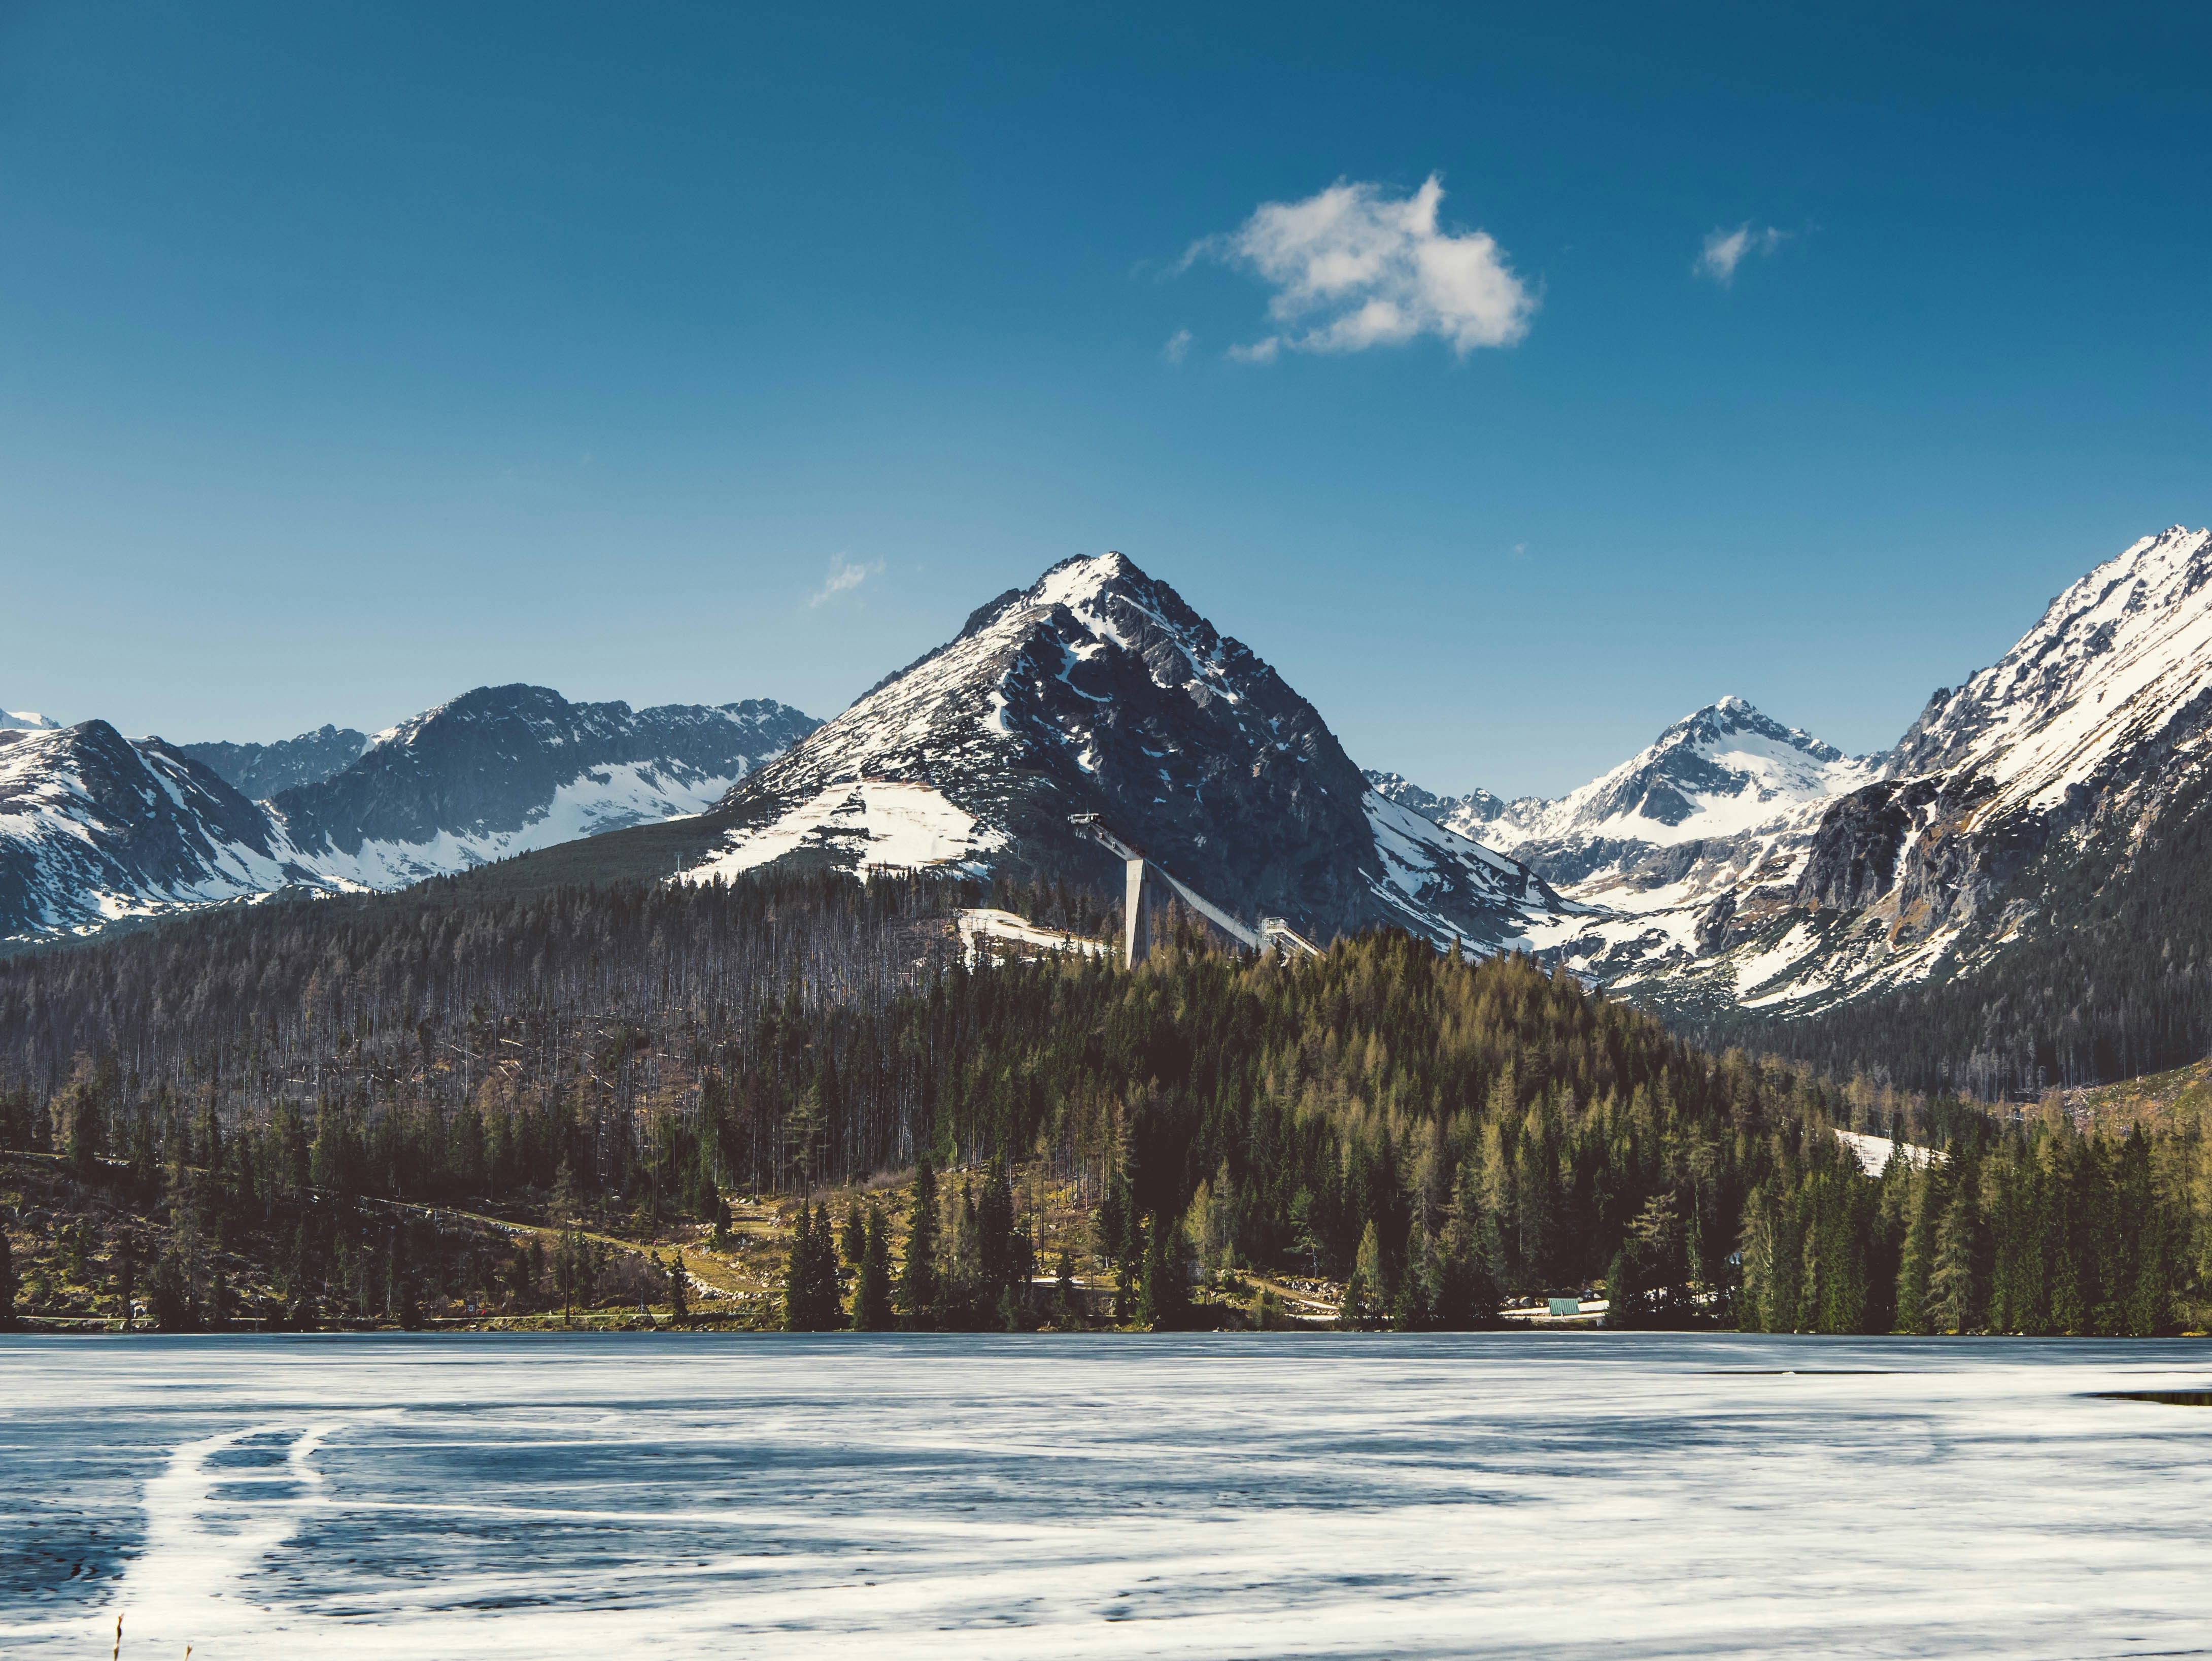 snow-covered mountains near trees and frozen lake during daytime